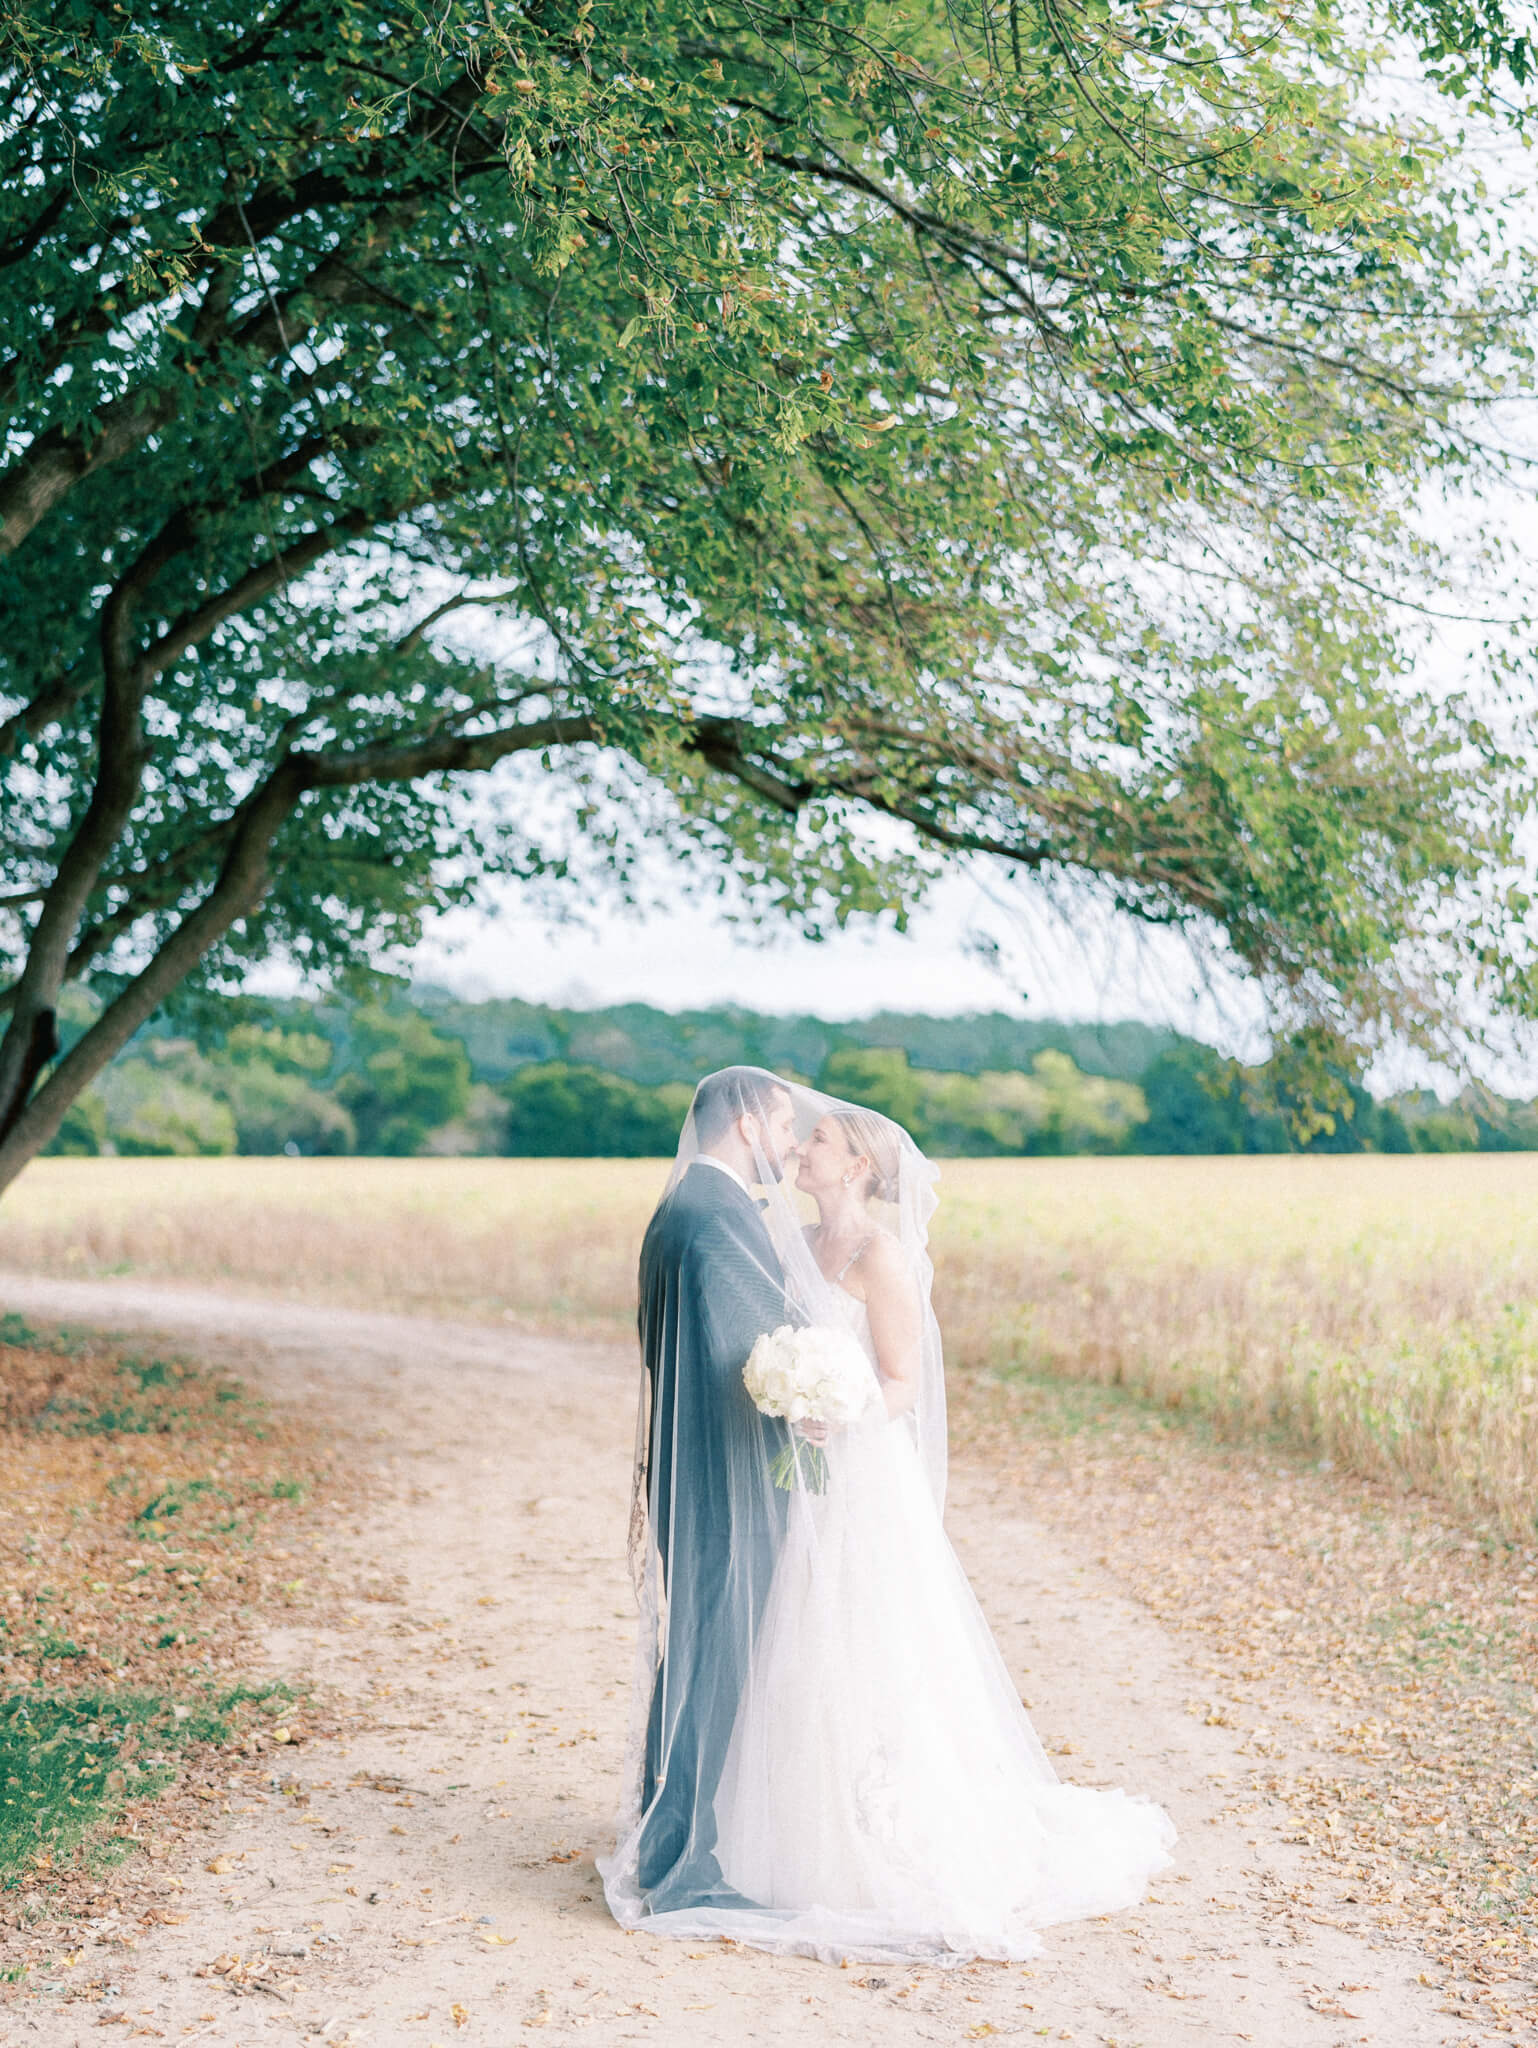 A bride and groom kissing under the veil on a dirt road with overhanging trees and fields in the background